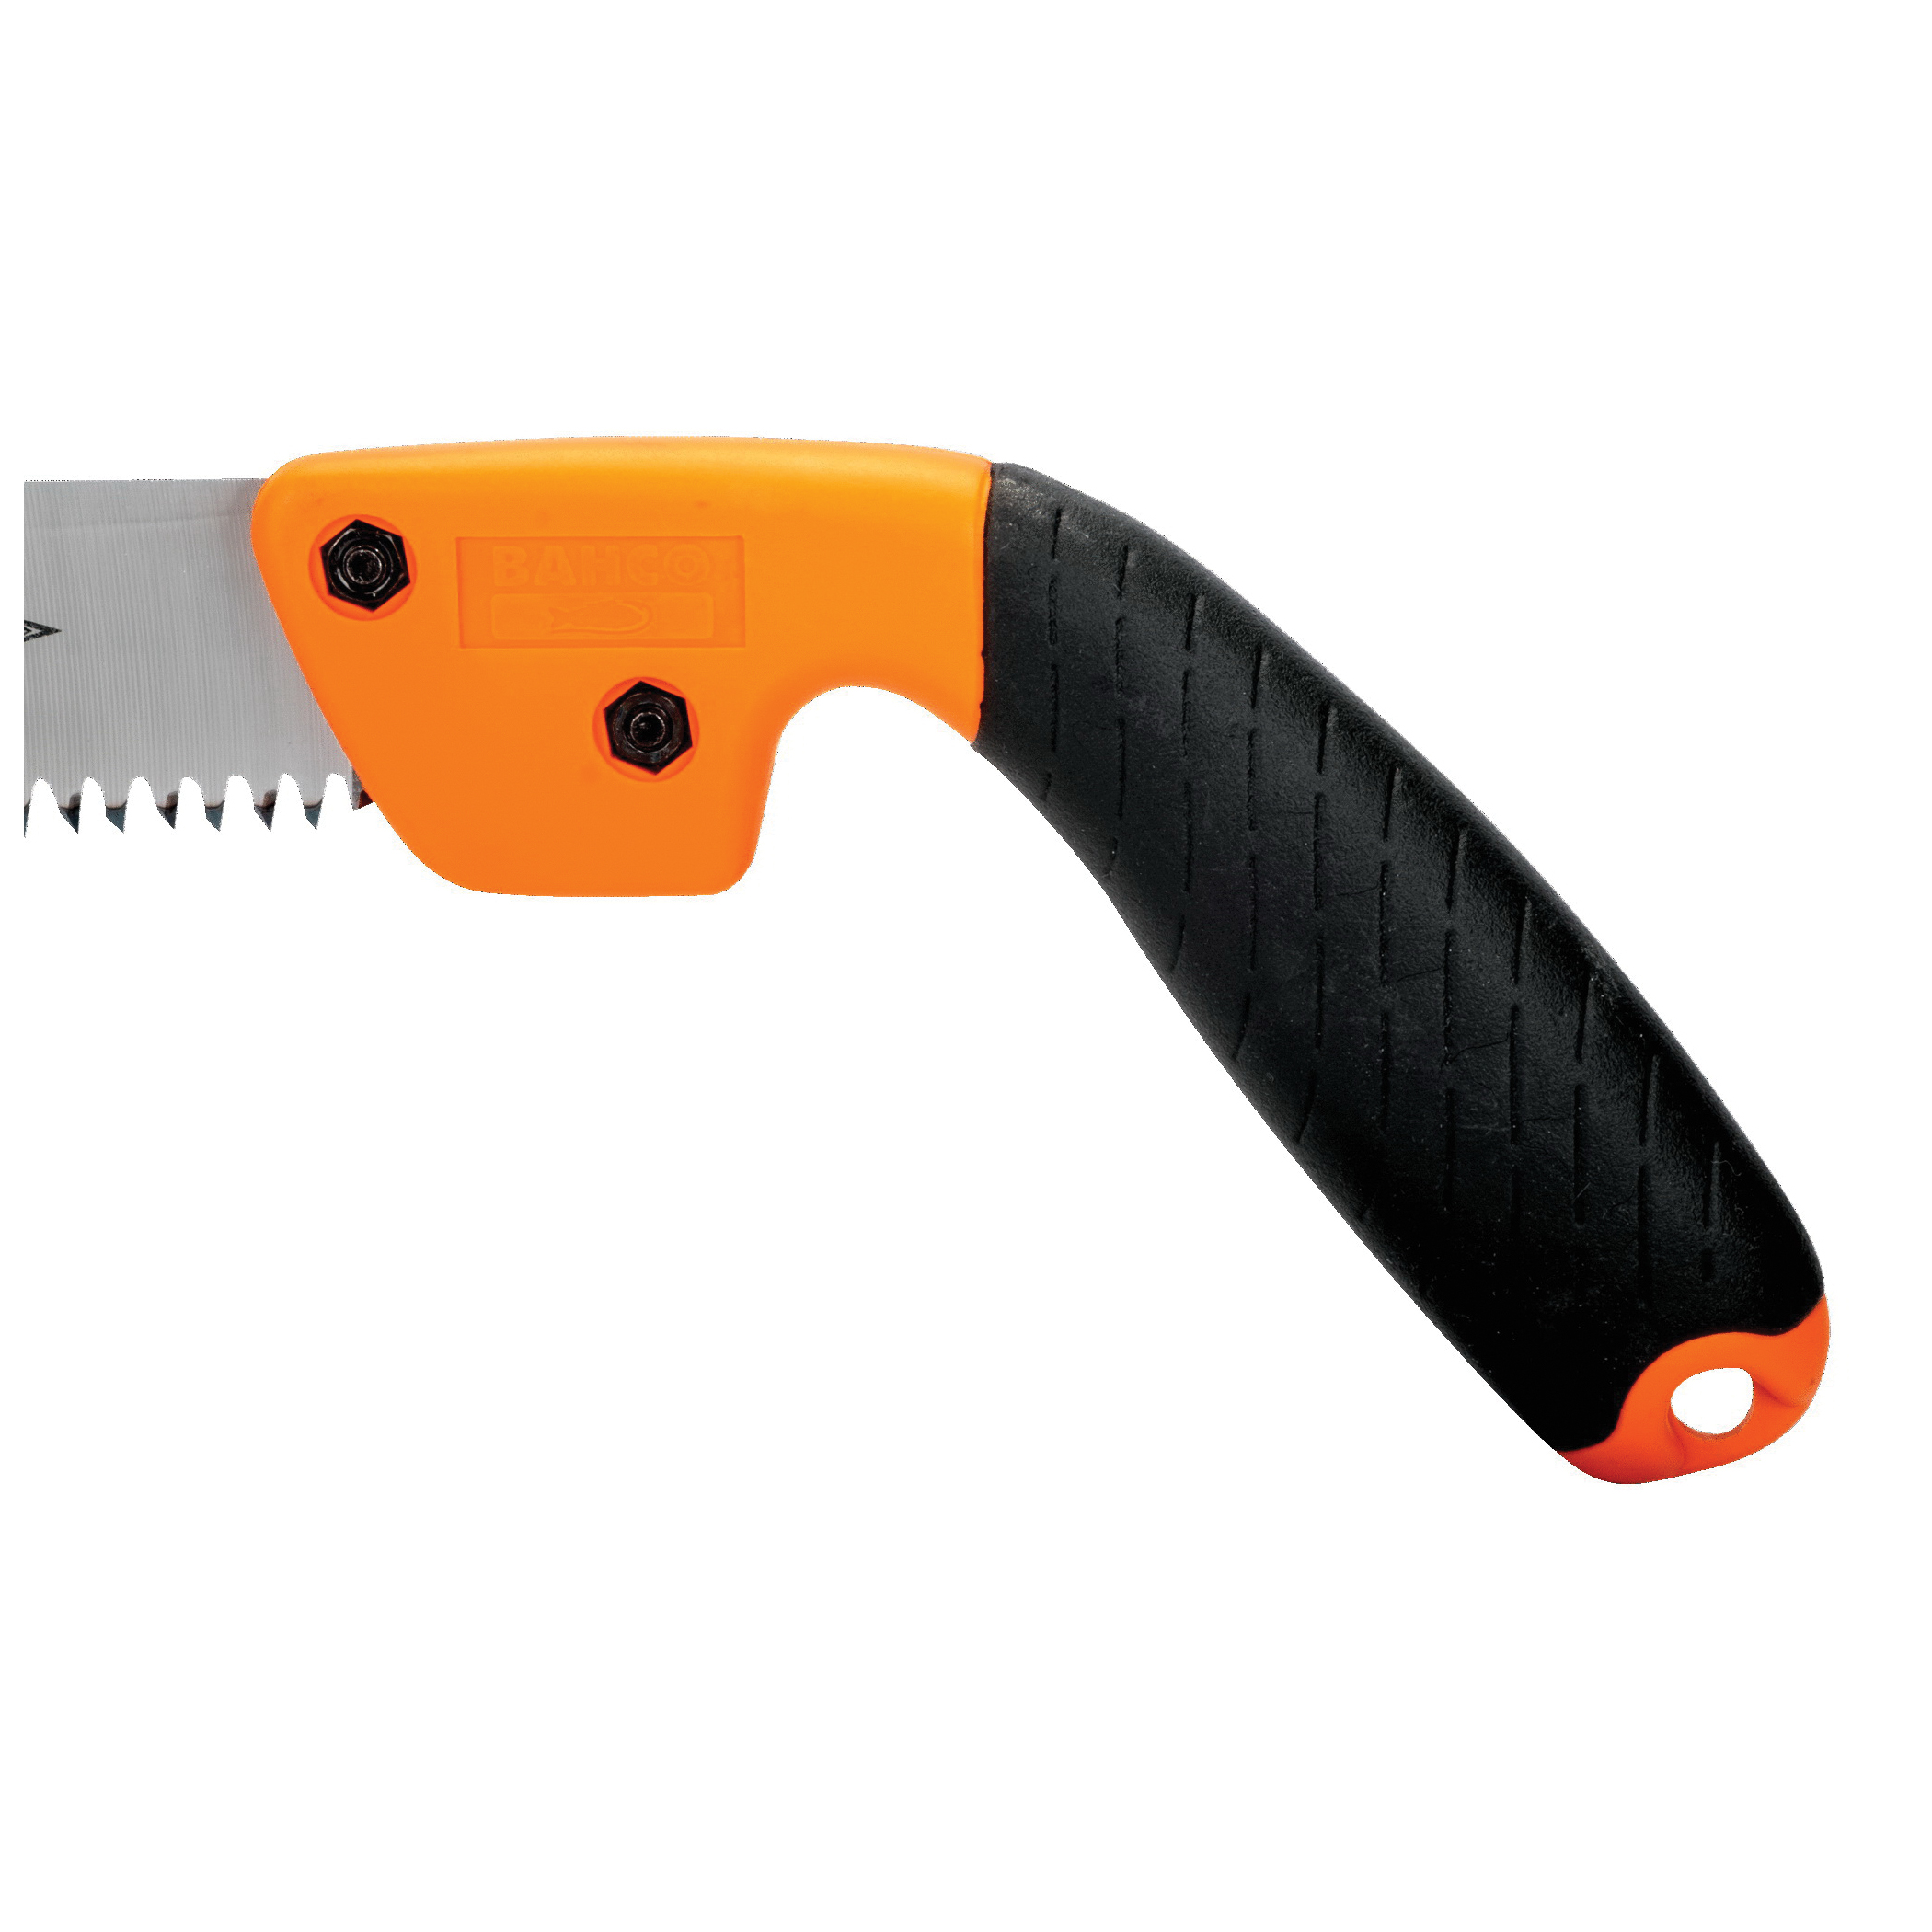 Bahco 5124-JS-H Pruning Saw with 2-Component Handle, 9-1/2 in Blade, 5 TPI, Comfort-Grip Handle - 4